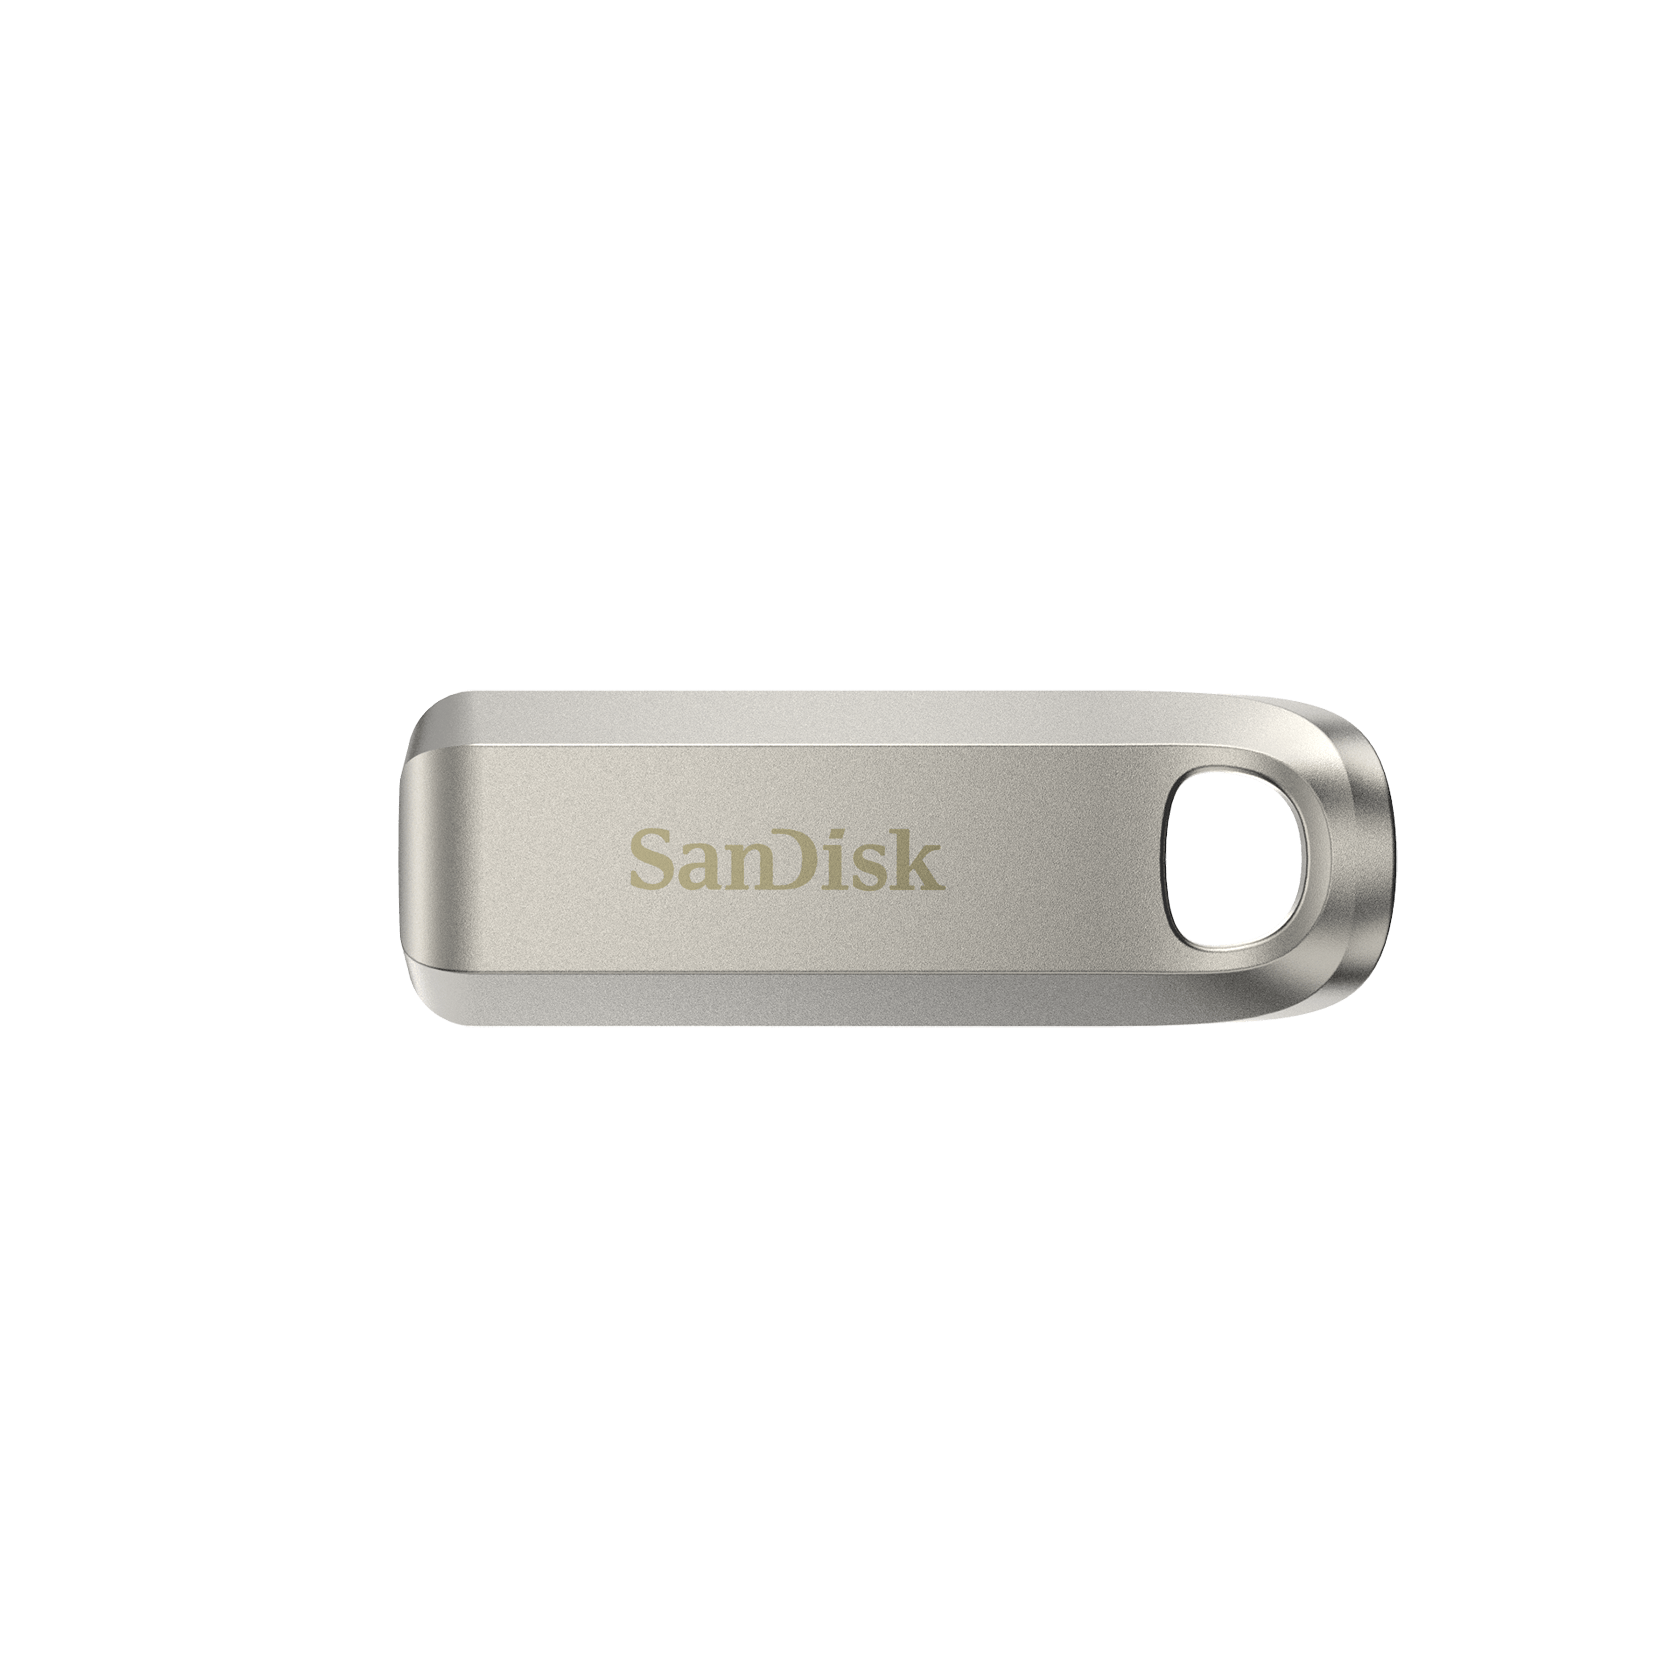 SanDisk Ultra Luxe USB Type-C Drive - 256GB - SDCZ75-256G-G46